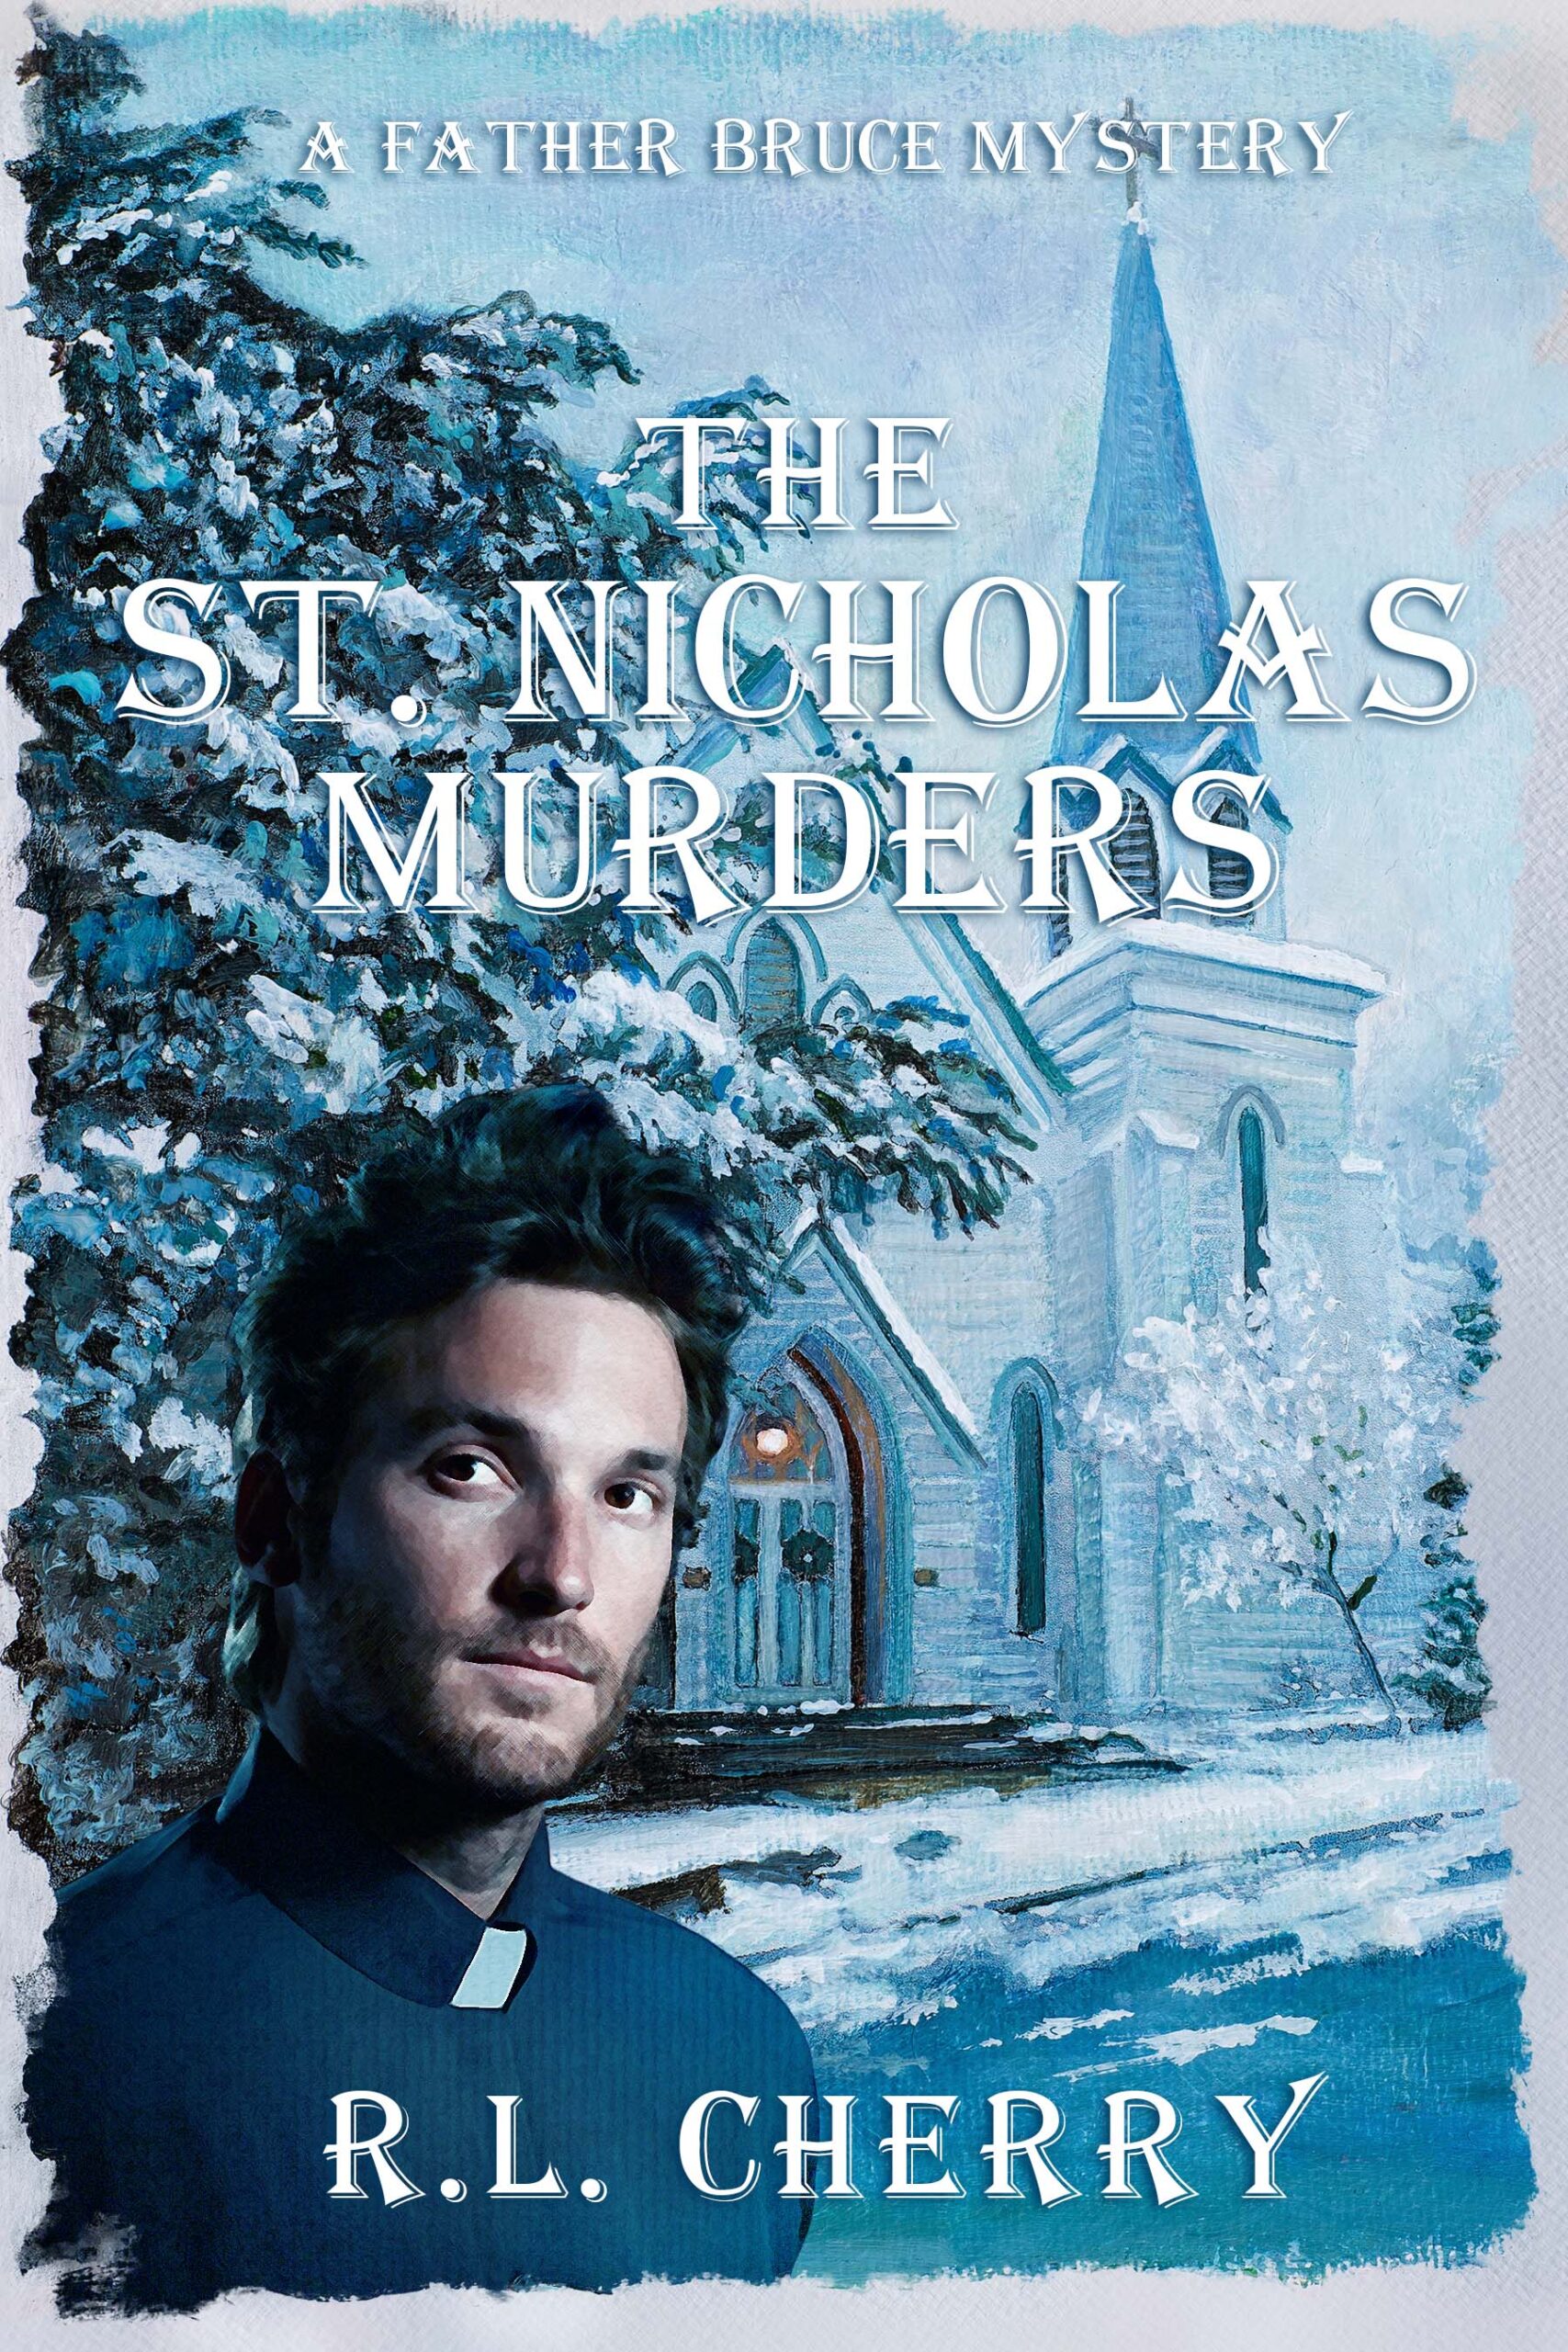 FREE: The St. Nicholas Murders: A Father Bruce Mystery by R.L. Cherry